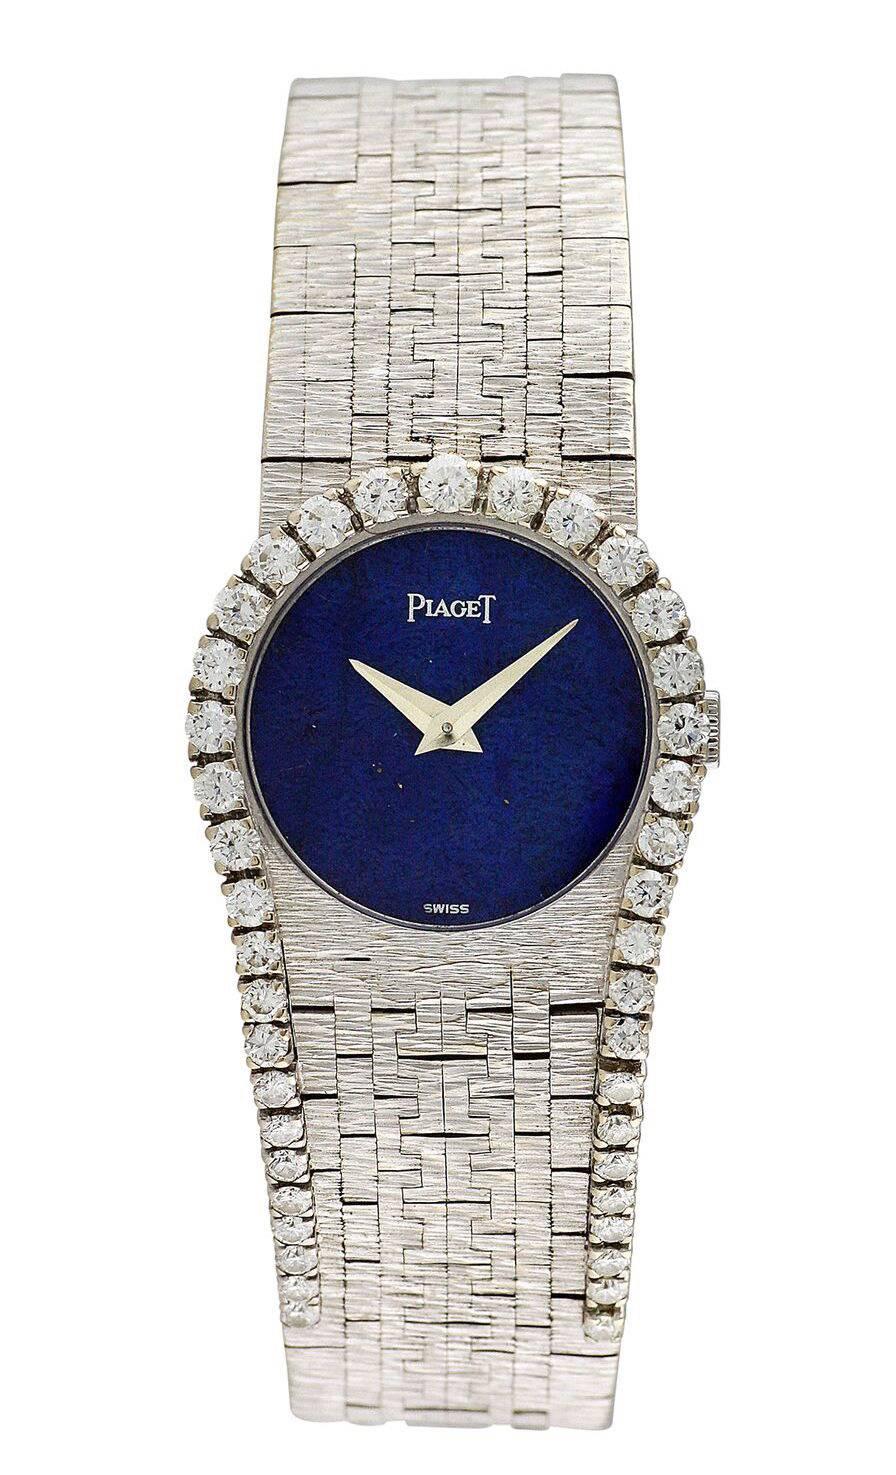 Circa 1970, this 18k white gold Piaget bracelet watch with blue lapis lazuli dial and diamond horseshoe design. Textured geometric hand-finished bracelet. An elegant and rare lady's jewelry watch.

Mechanical Movement. 